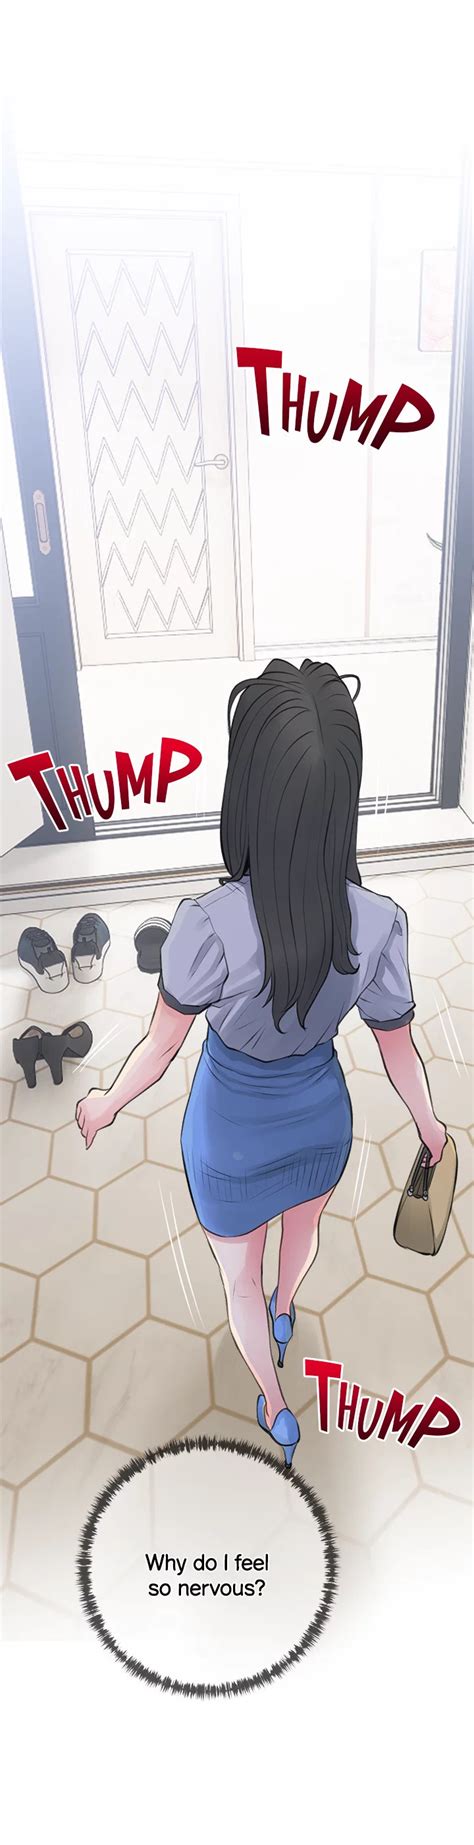 Banging My Aunt - Chapter 27 with HD image quality and high loading speed at If images do not load, please change the server. . Banging my aunt manga